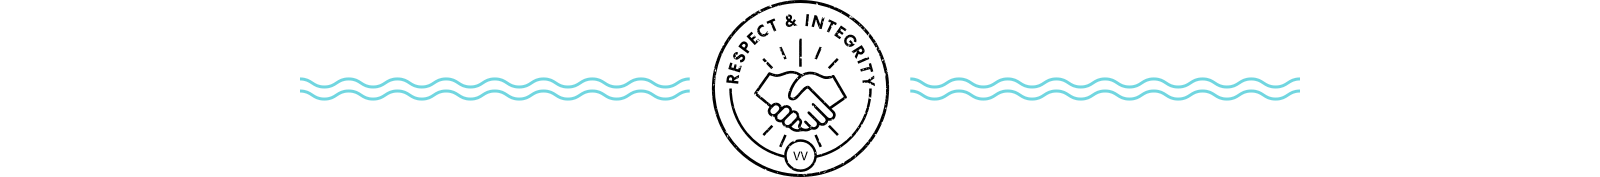 Respect integrity divider with image of a hand shake